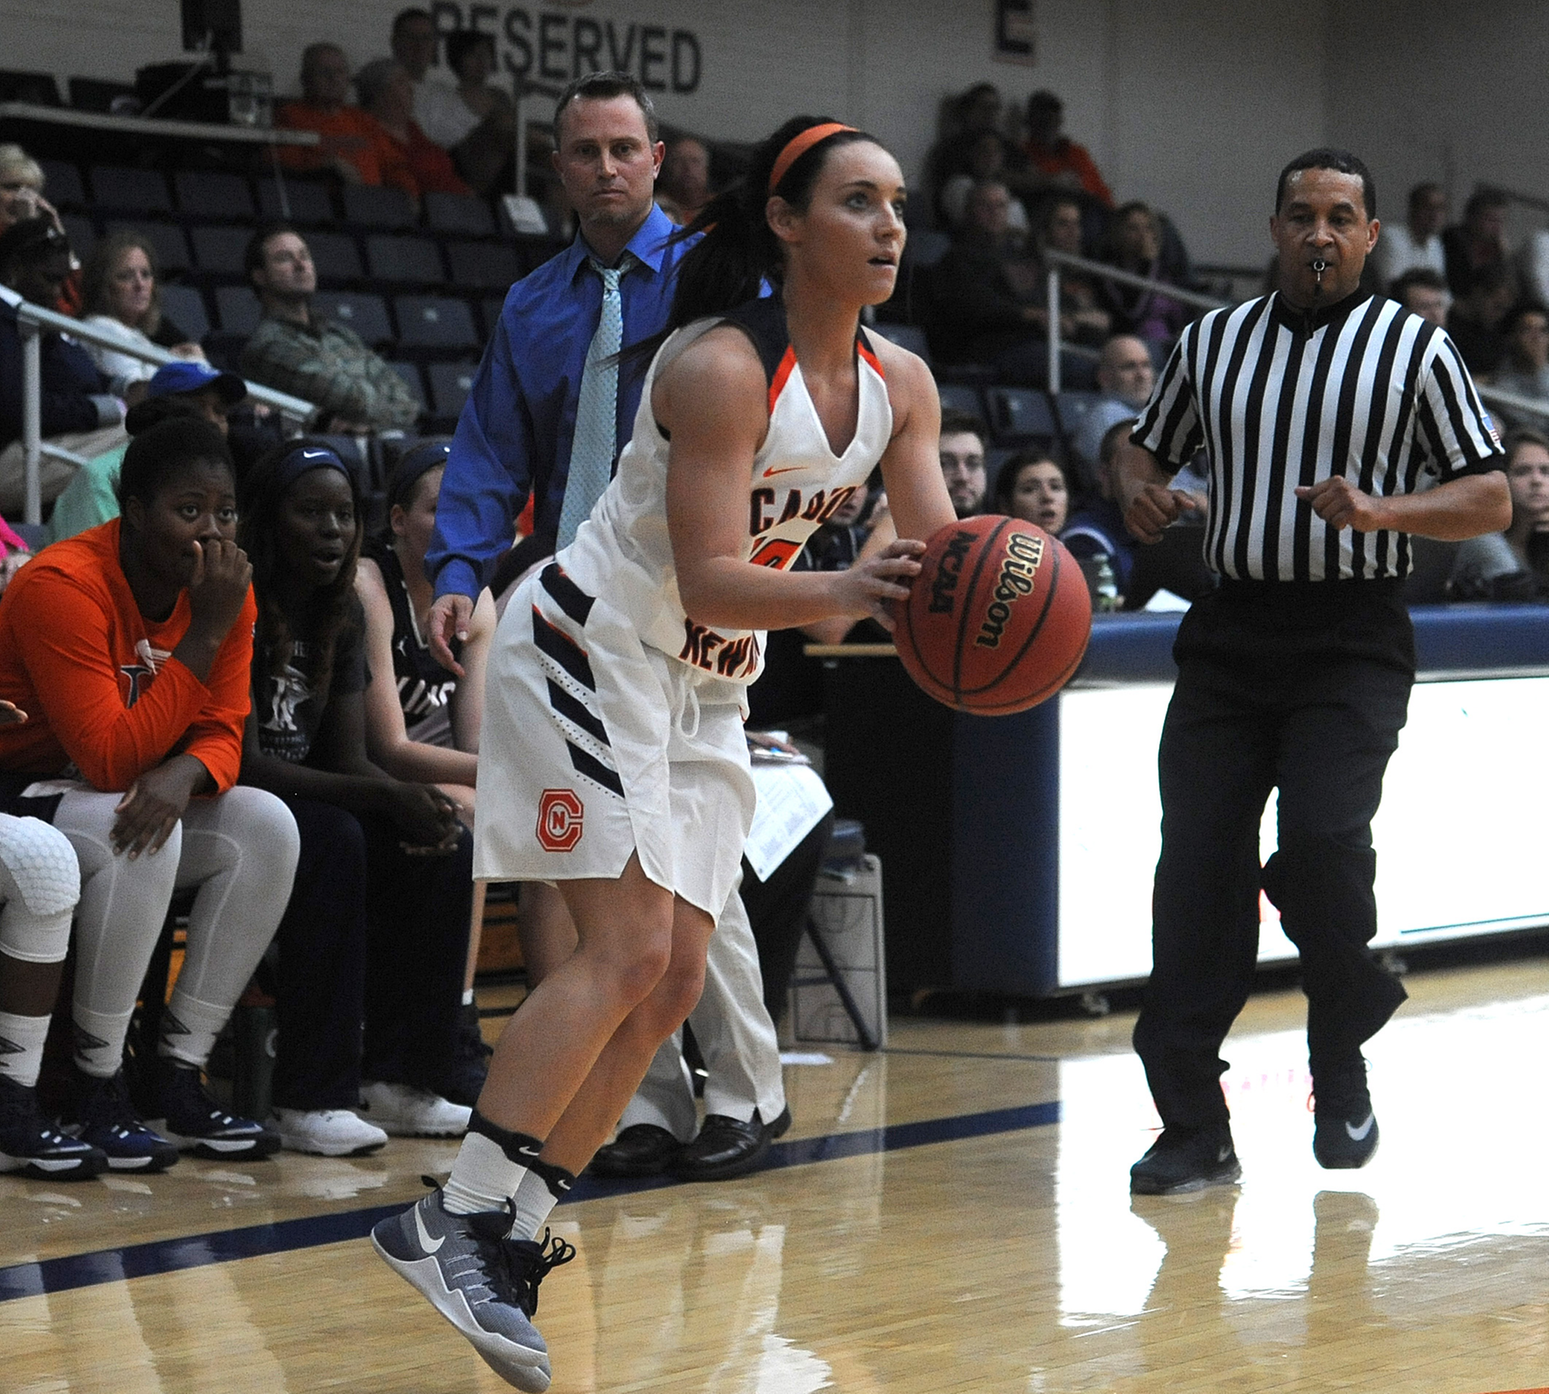 Price seals win to knock Catawba from conference unbeatens